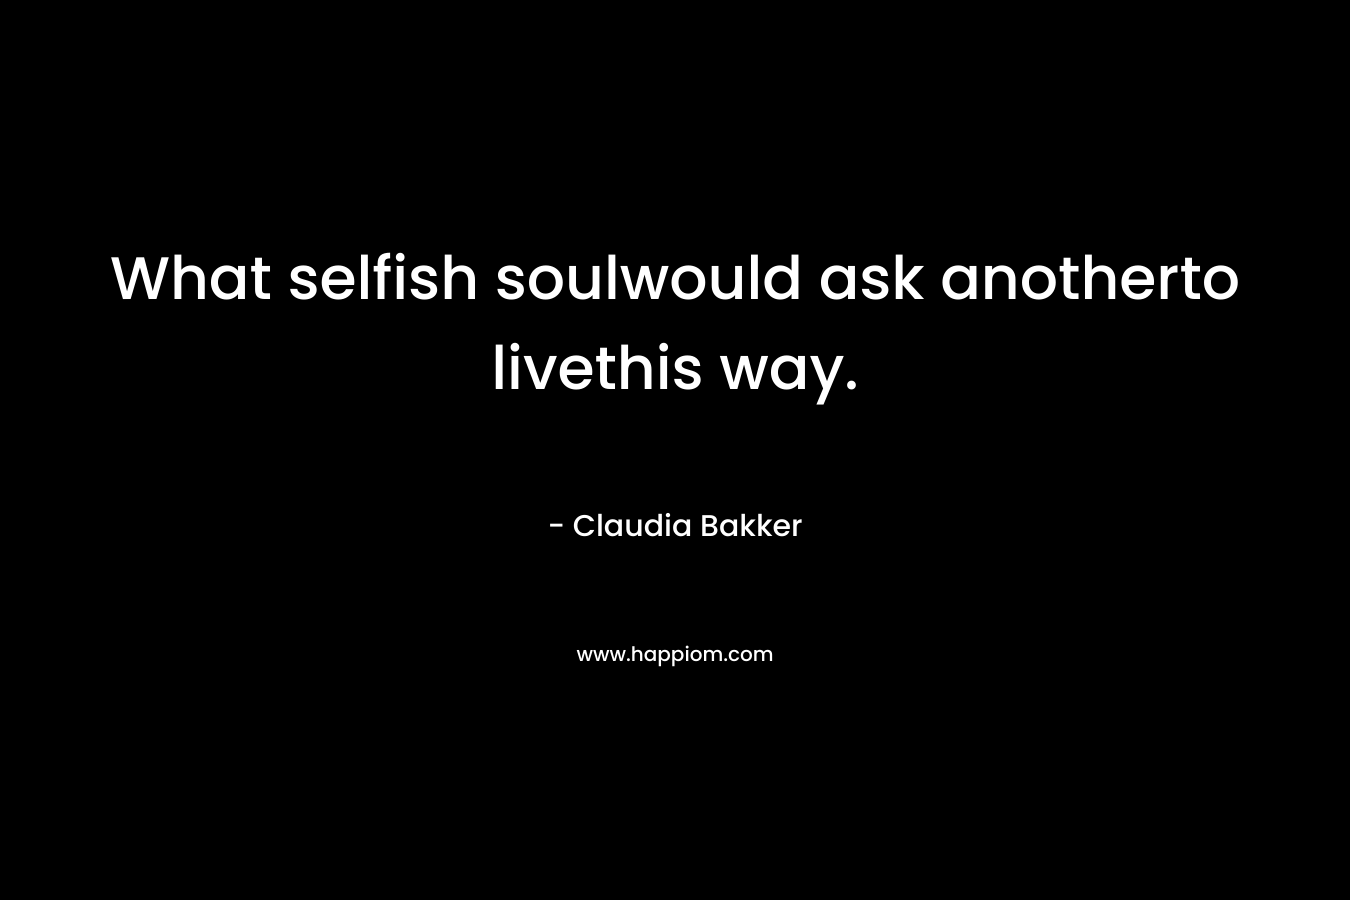 What selfish soulwould ask anotherto livethis way. – Claudia Bakker